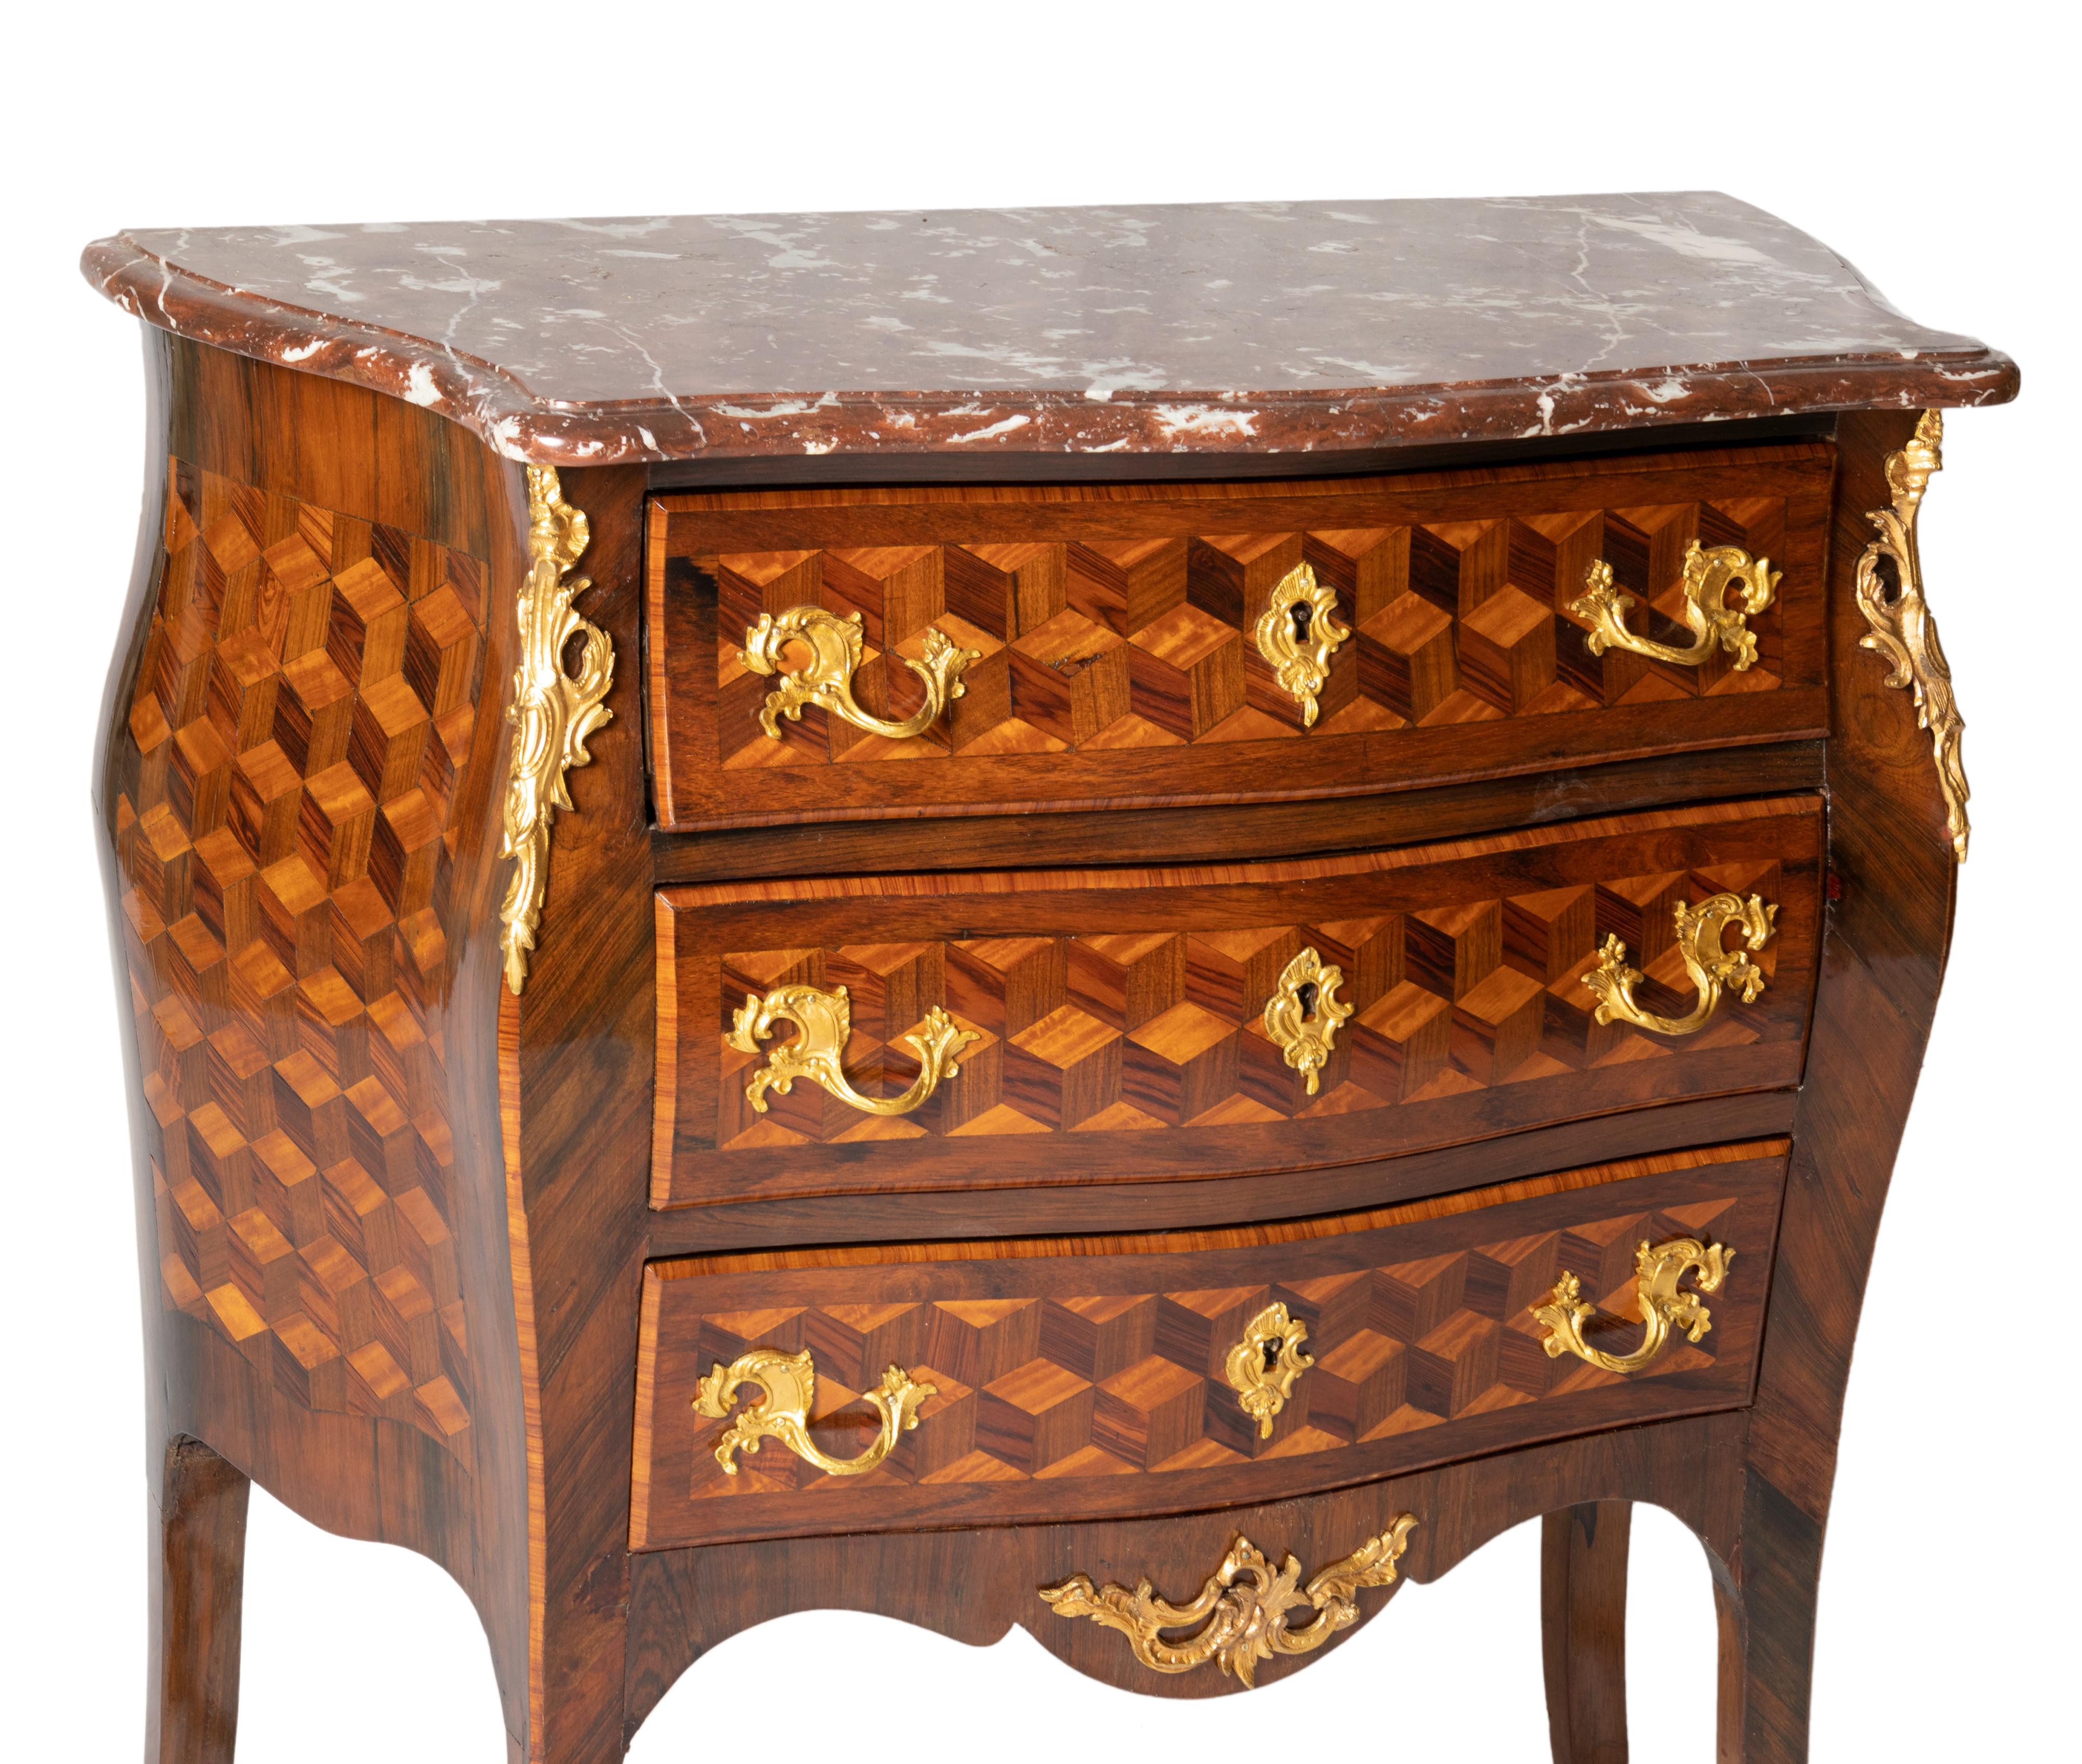 A french rosewood and burled walnut commode, stamped gilded bronze handles and three drawers. 
The upper drawer has three internal drawers, a François Hugnet piece, an accomplished artisan from the Faubourg Saint-Antoine Street, Paris.  

In 1846